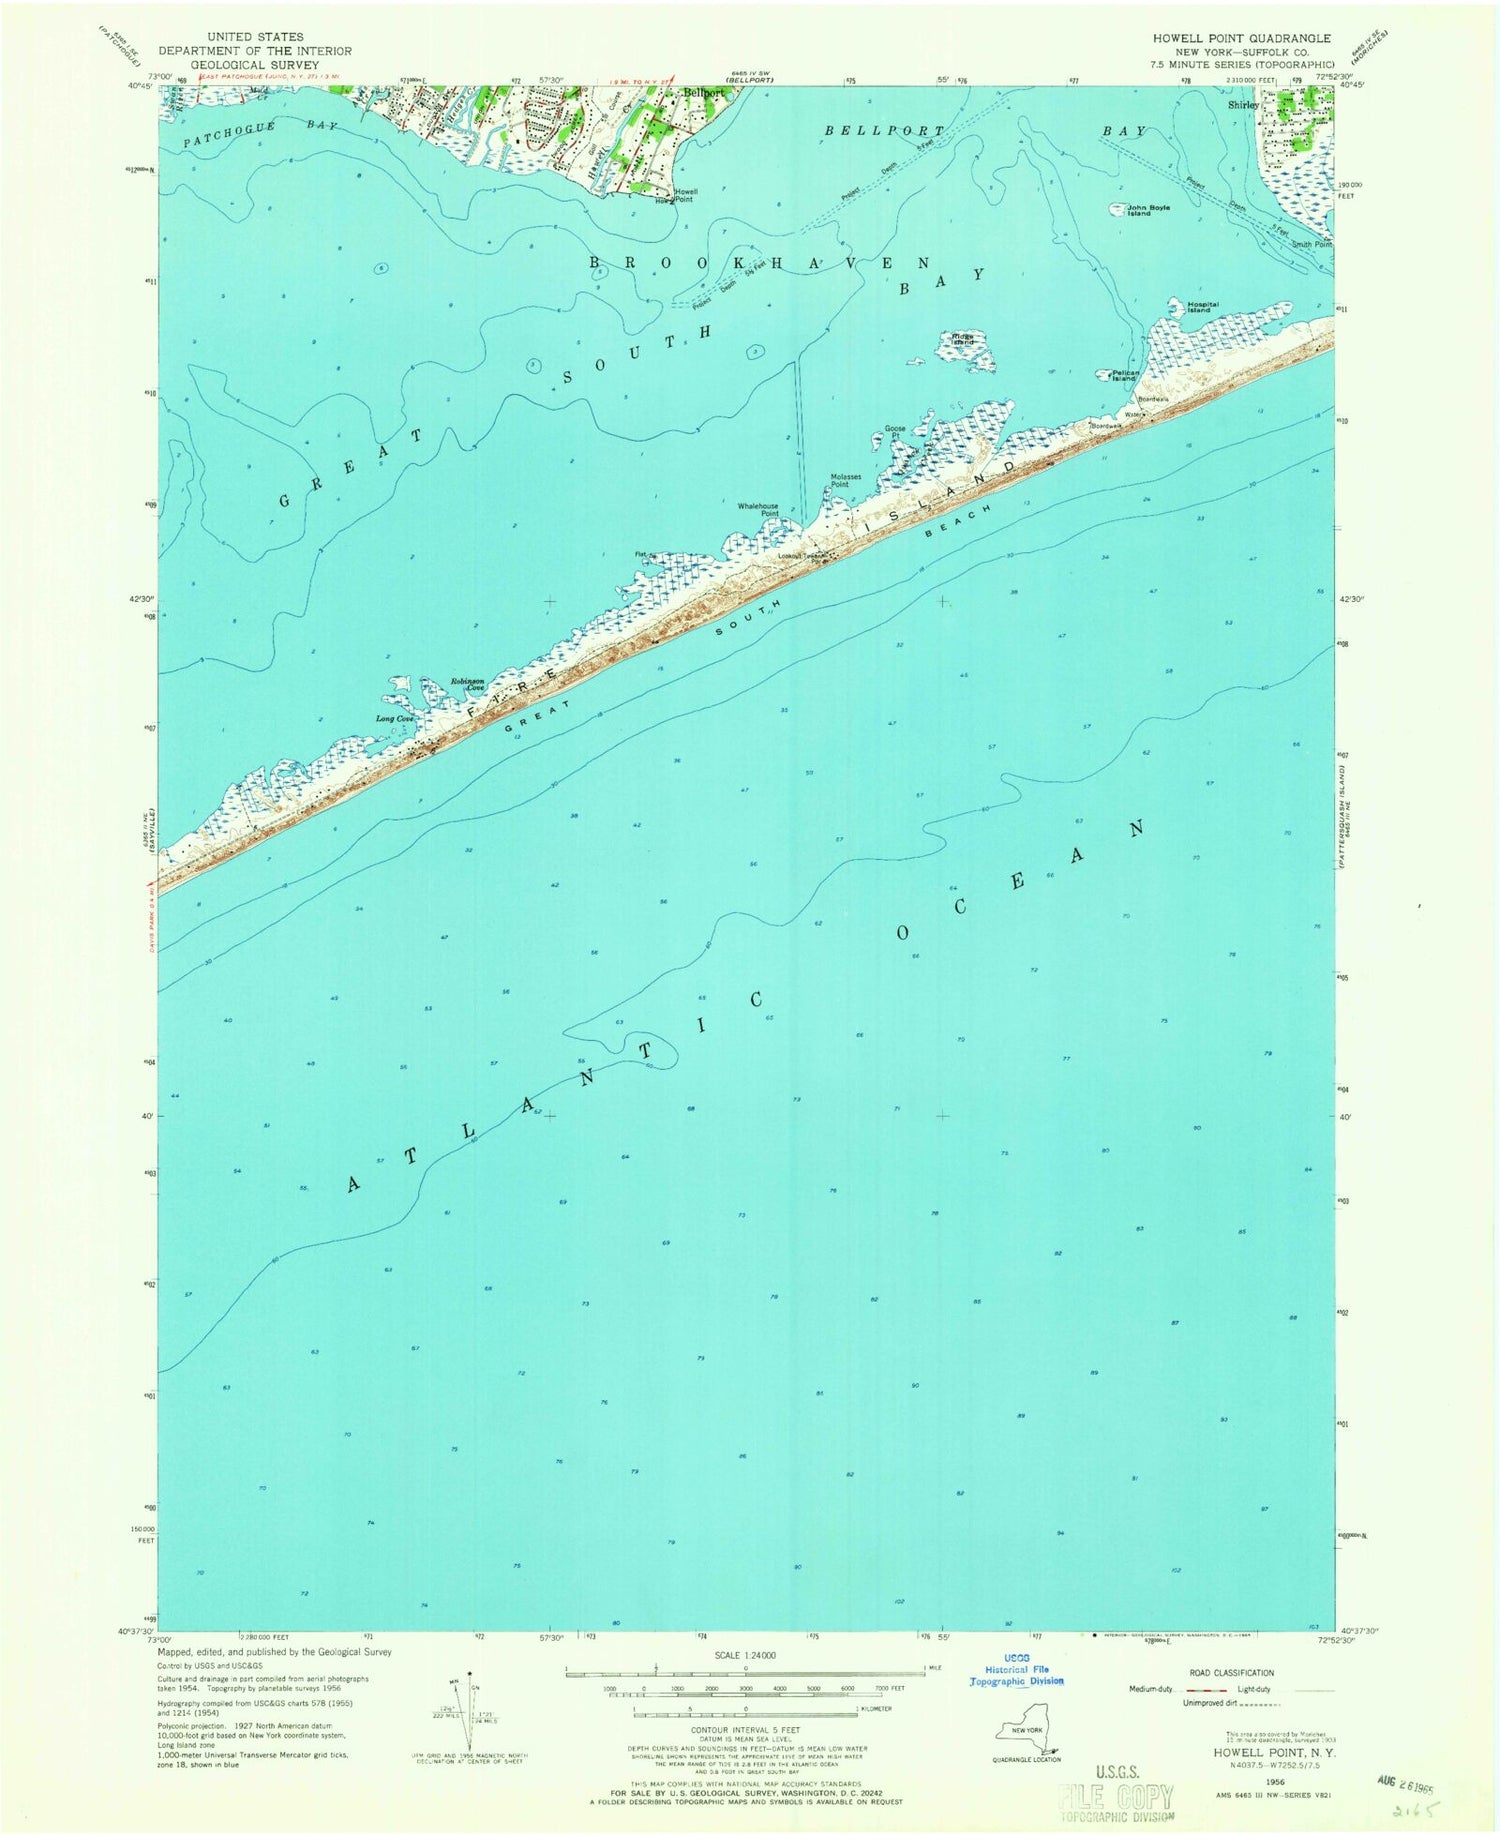 Classic USGS Howells Point New York 7.5'x7.5' Topo Map Image